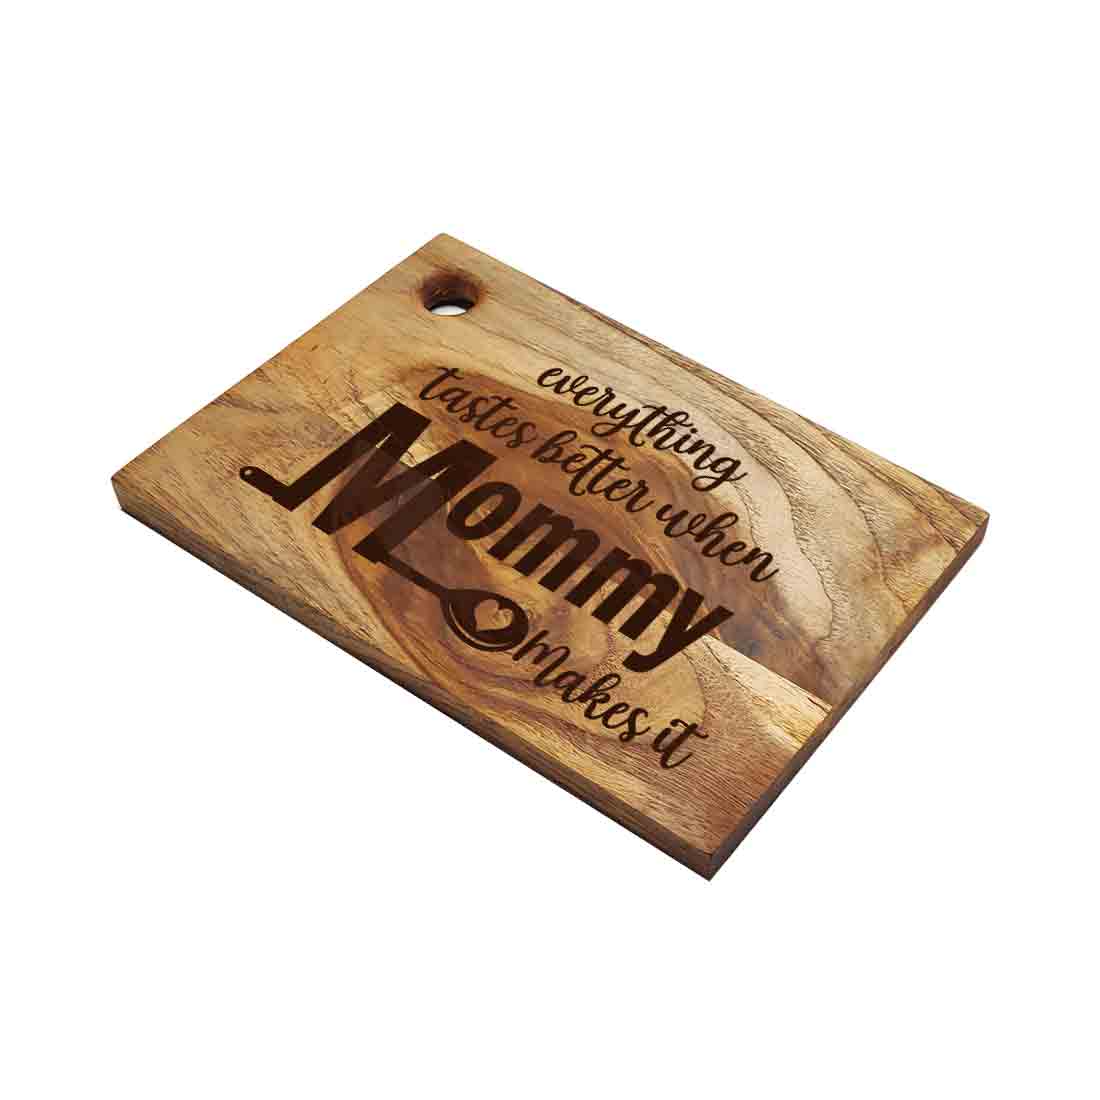 Mother s Day Gift for Mom Unique Engraved Cutting Board Vegetable Chopping Stand - Mommy